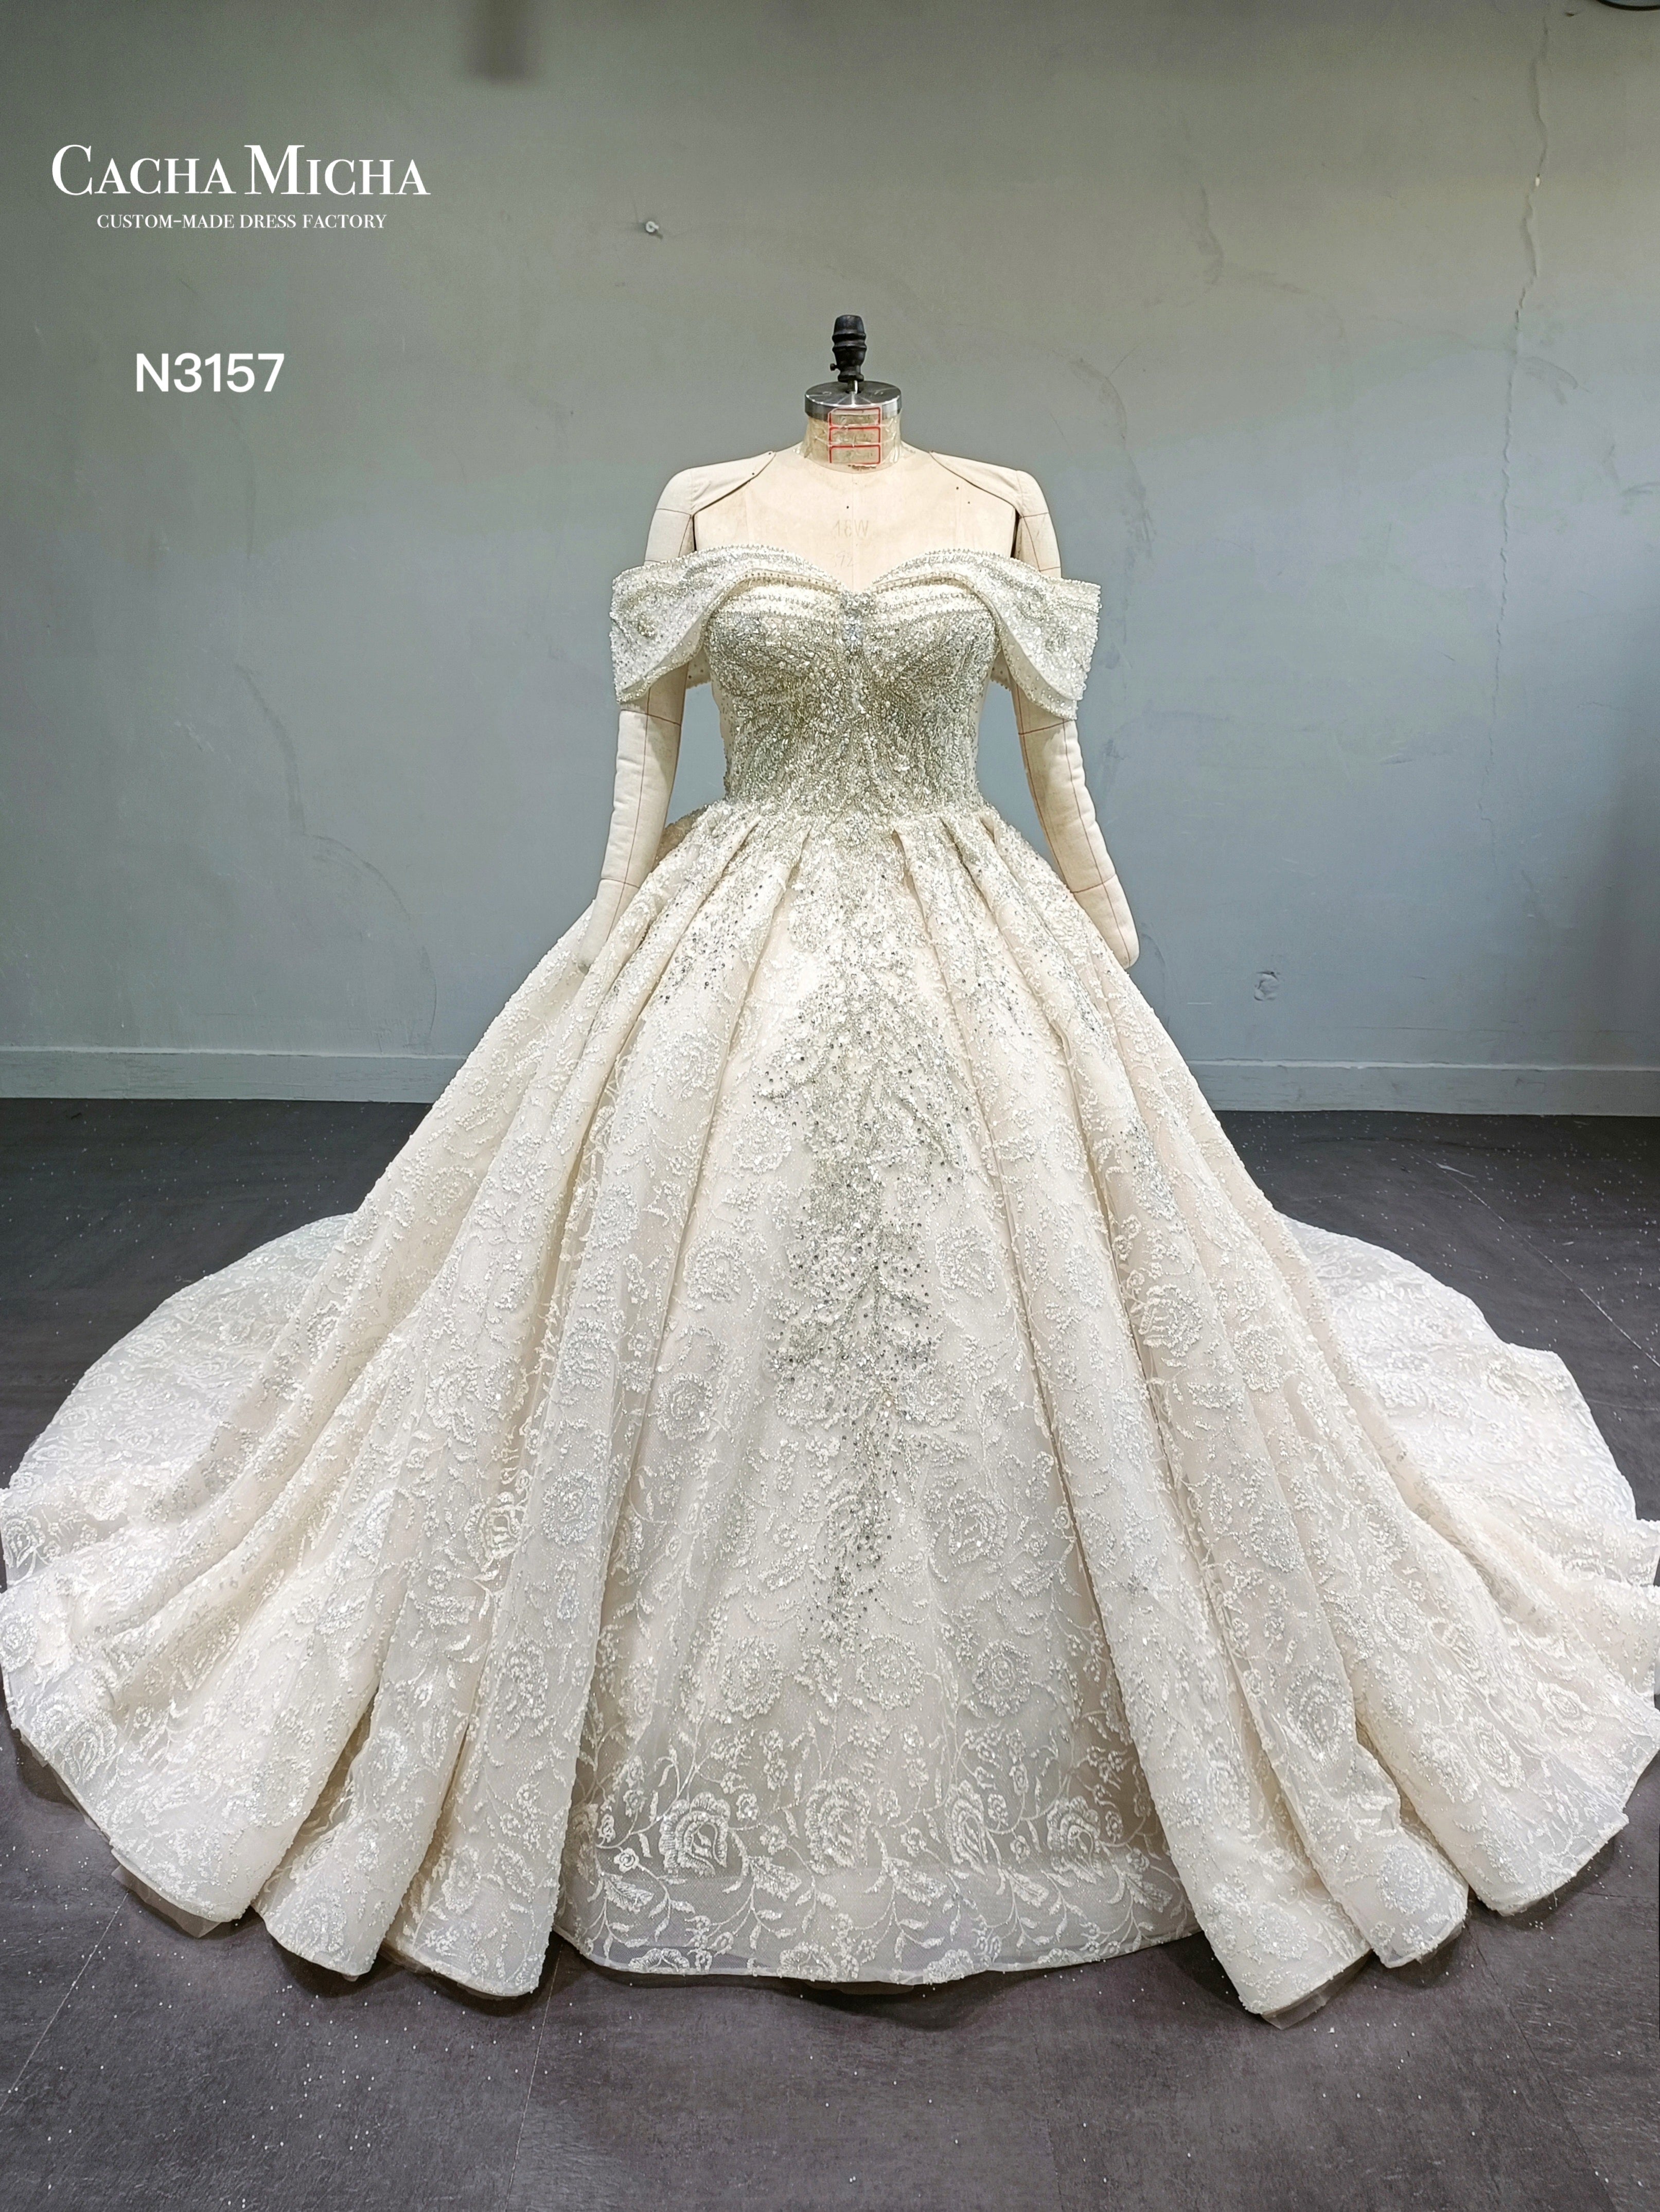 Champagne Glitter Lace Luxury Ball Gown Wedding Dress N3157